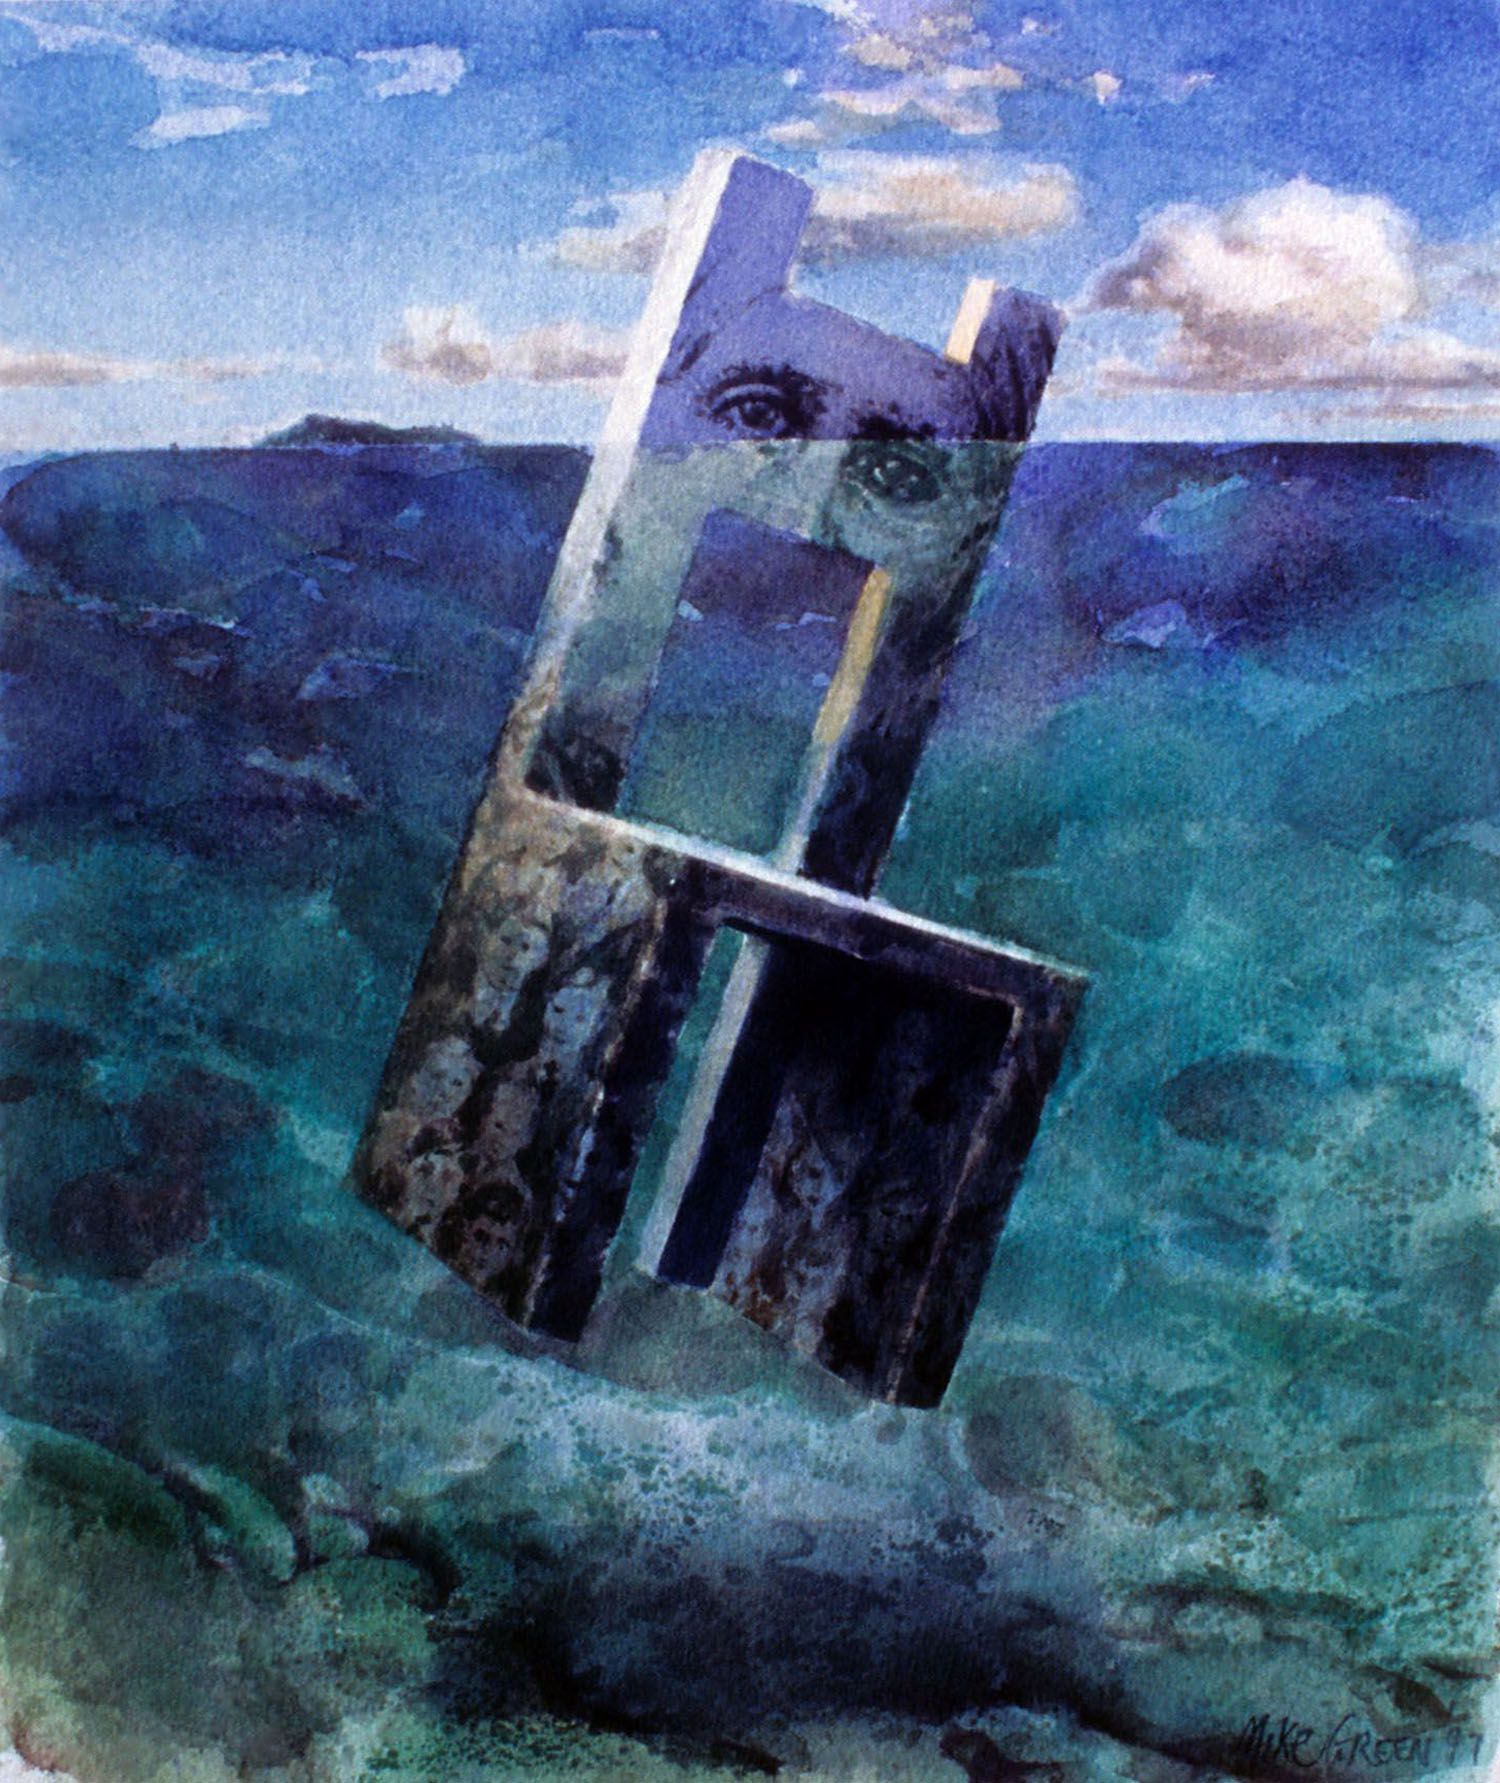 "Floating" 1997. Watercolour on 300 gms Arches paper. 33 x 27cm